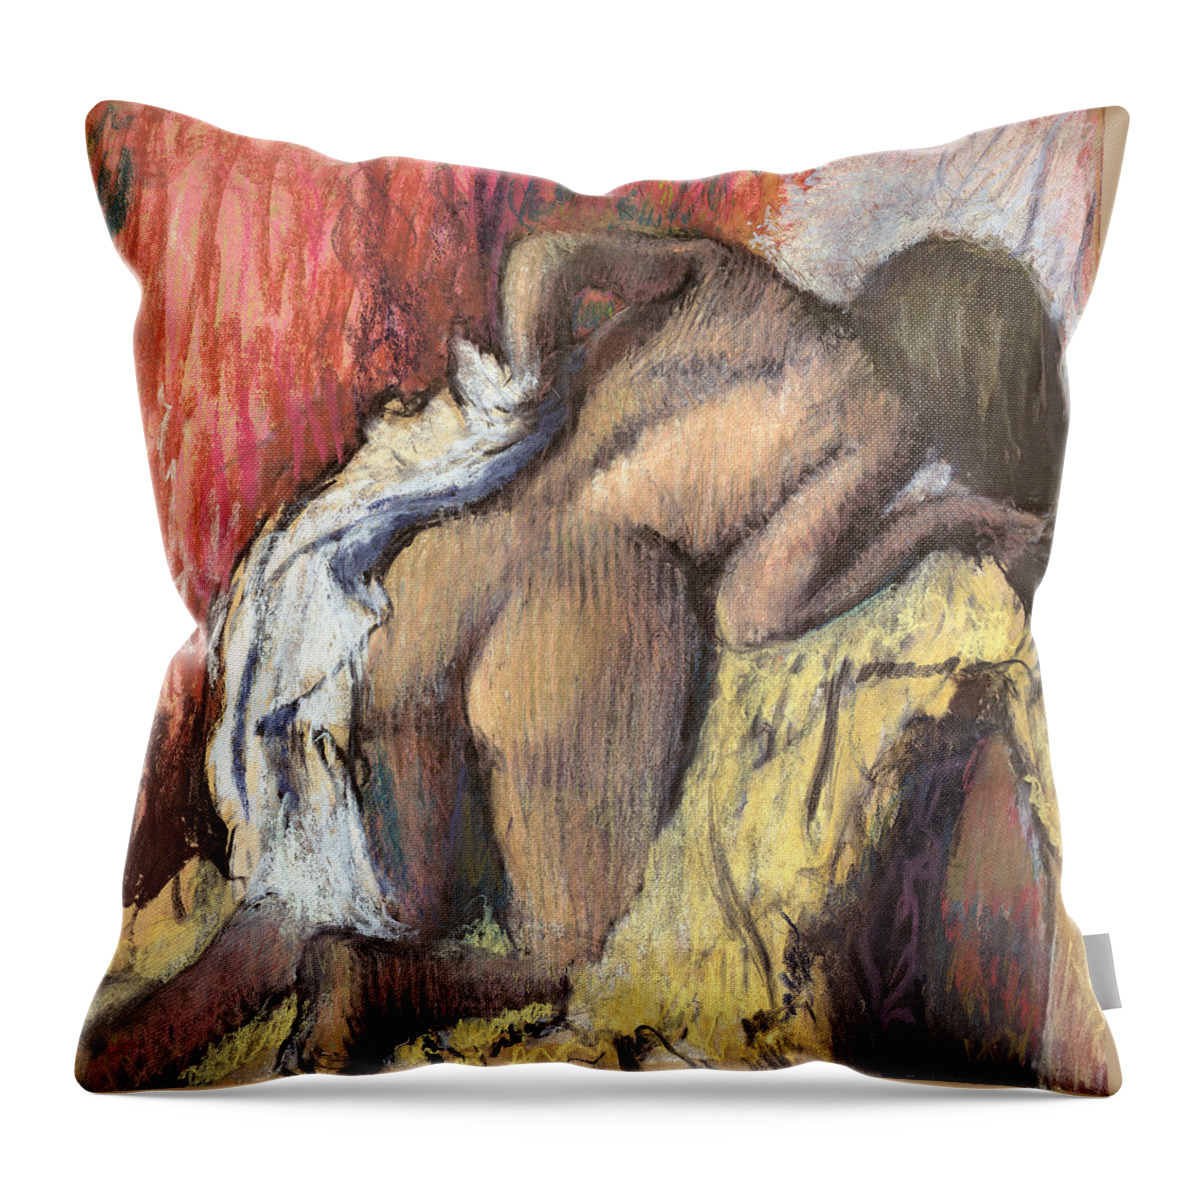 Degas Throw Pillow featuring the painting Woman Drying Herself by Edgar Degas